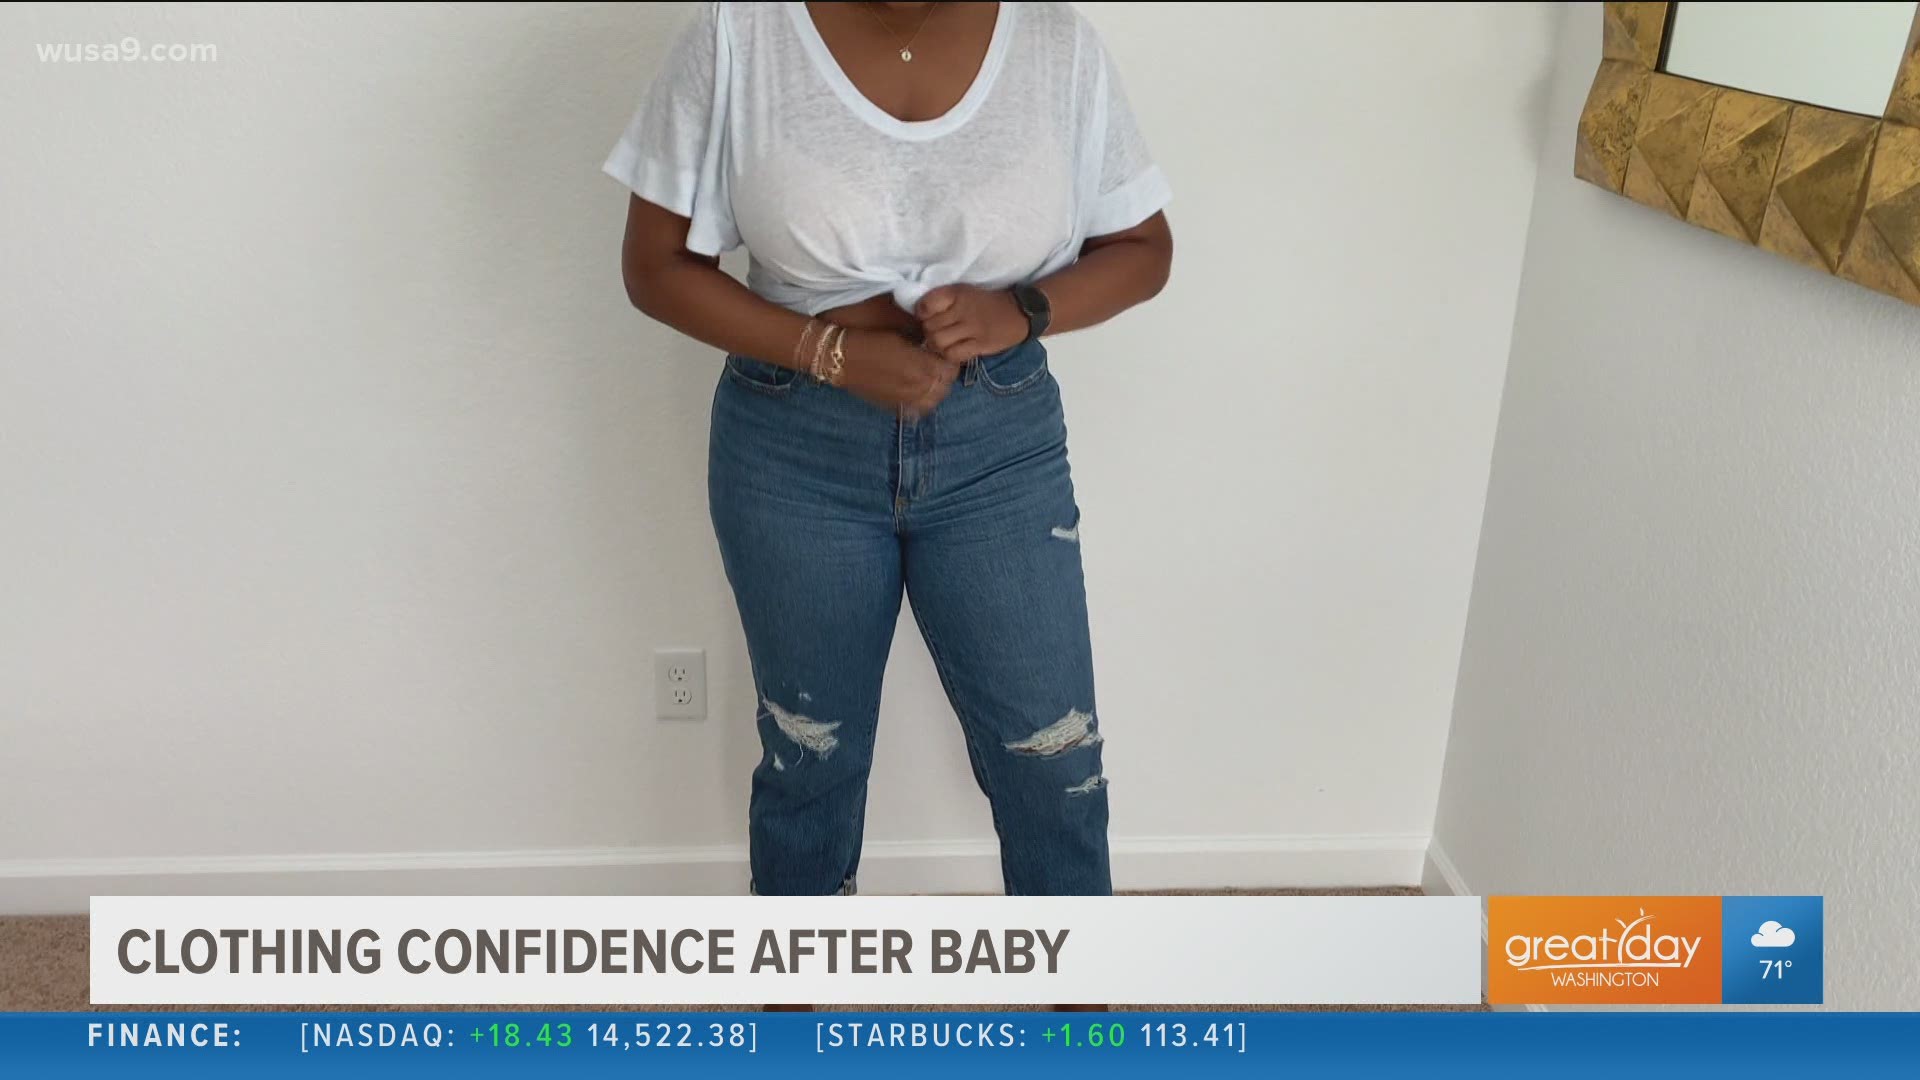 Lifestyle correspondent Stephanie Walters shares some tips to helping you regain your confidence after you have a baby.